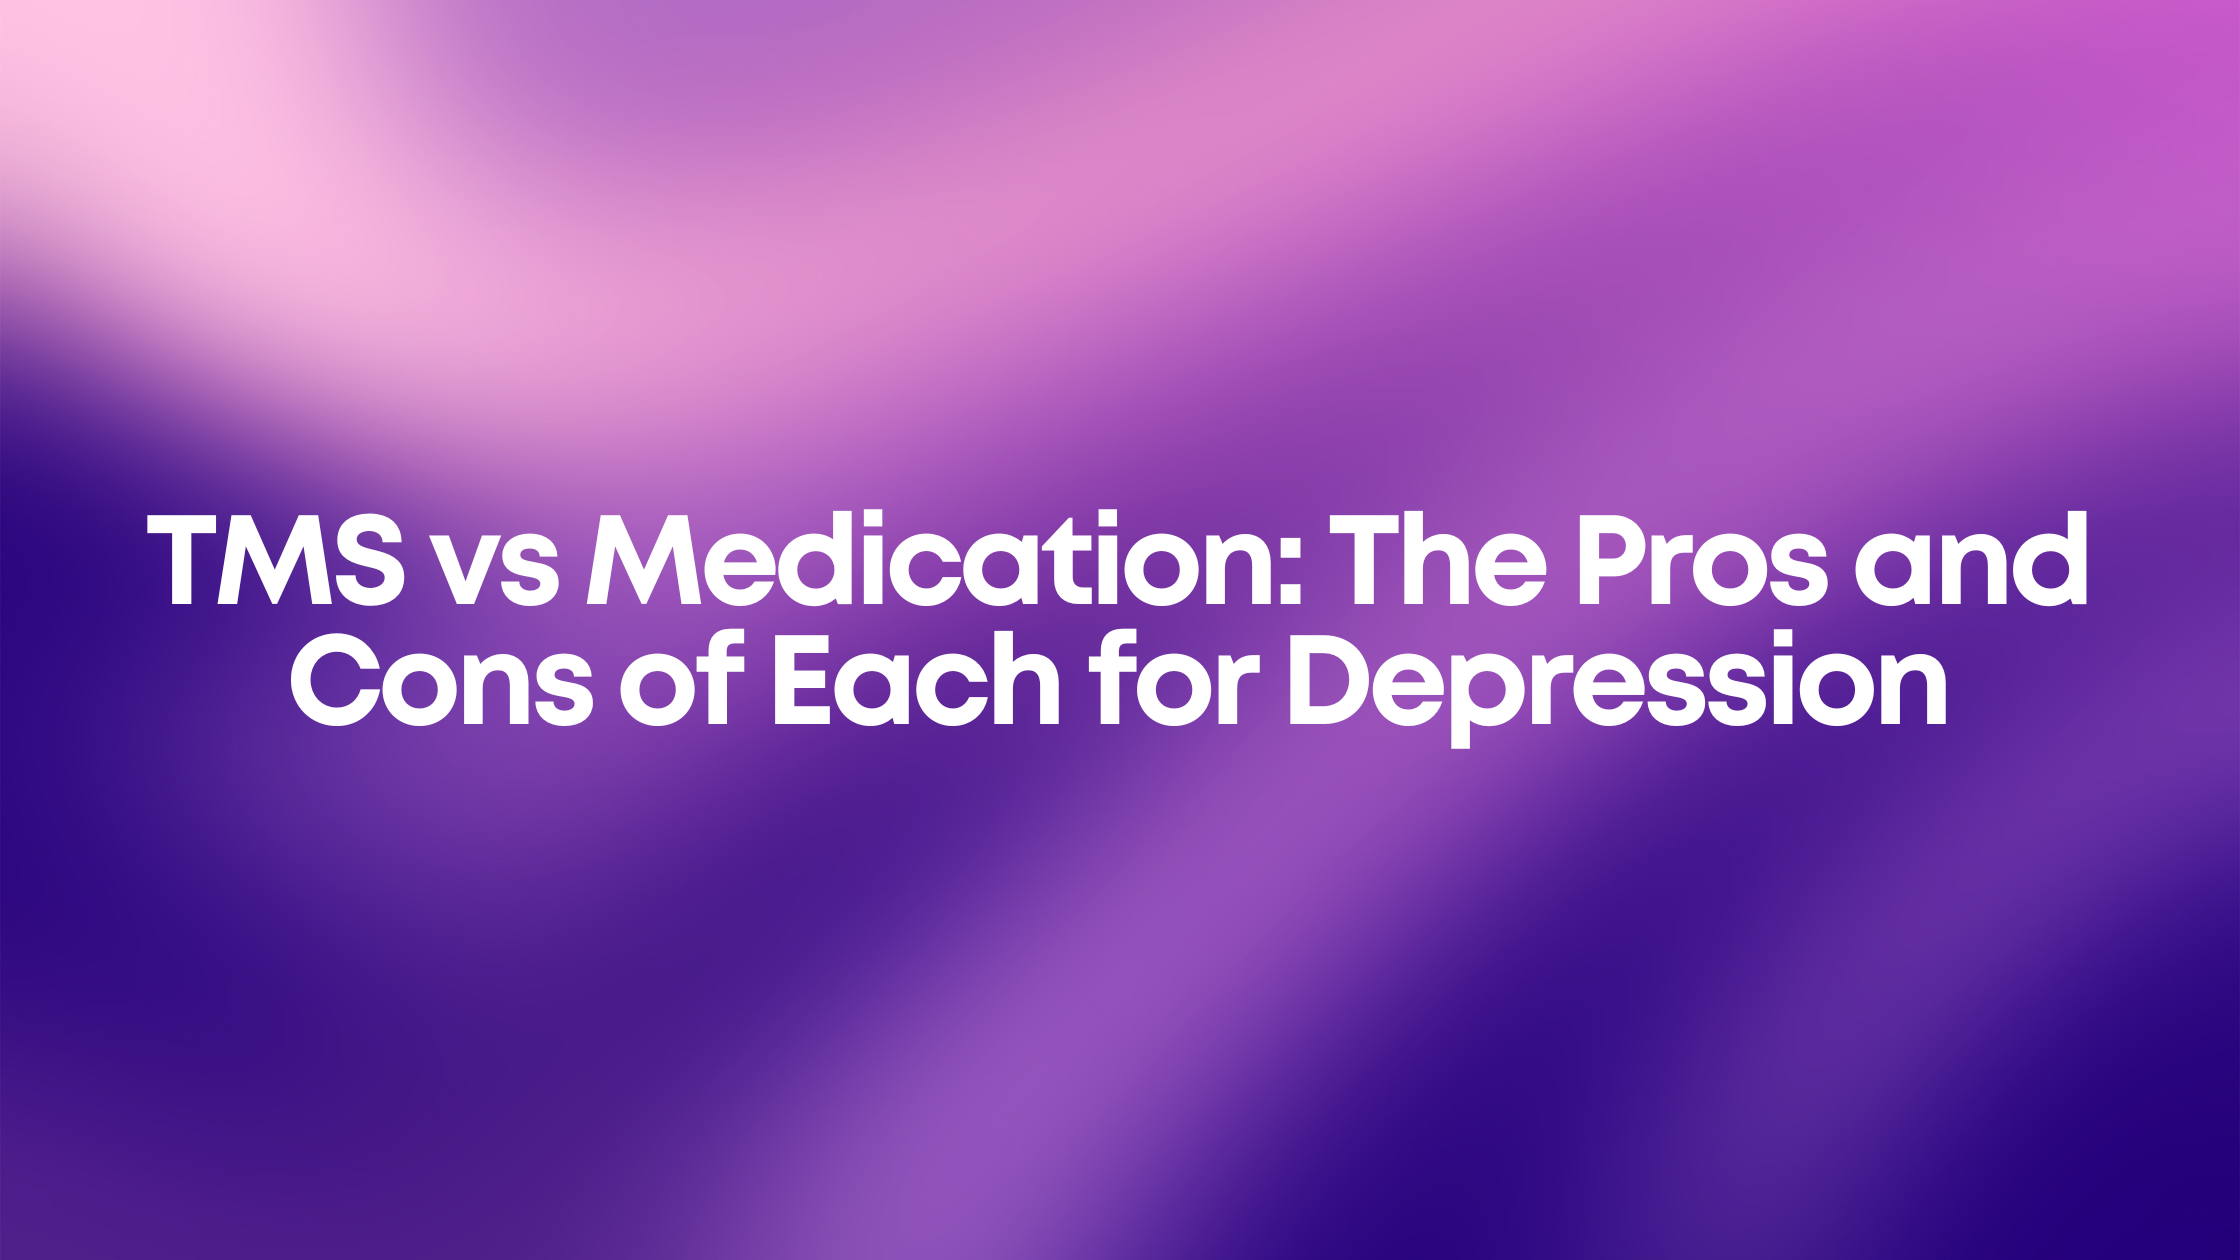 You are currently viewing TMS vs Medication: The Pros and Cons of Each for Depression